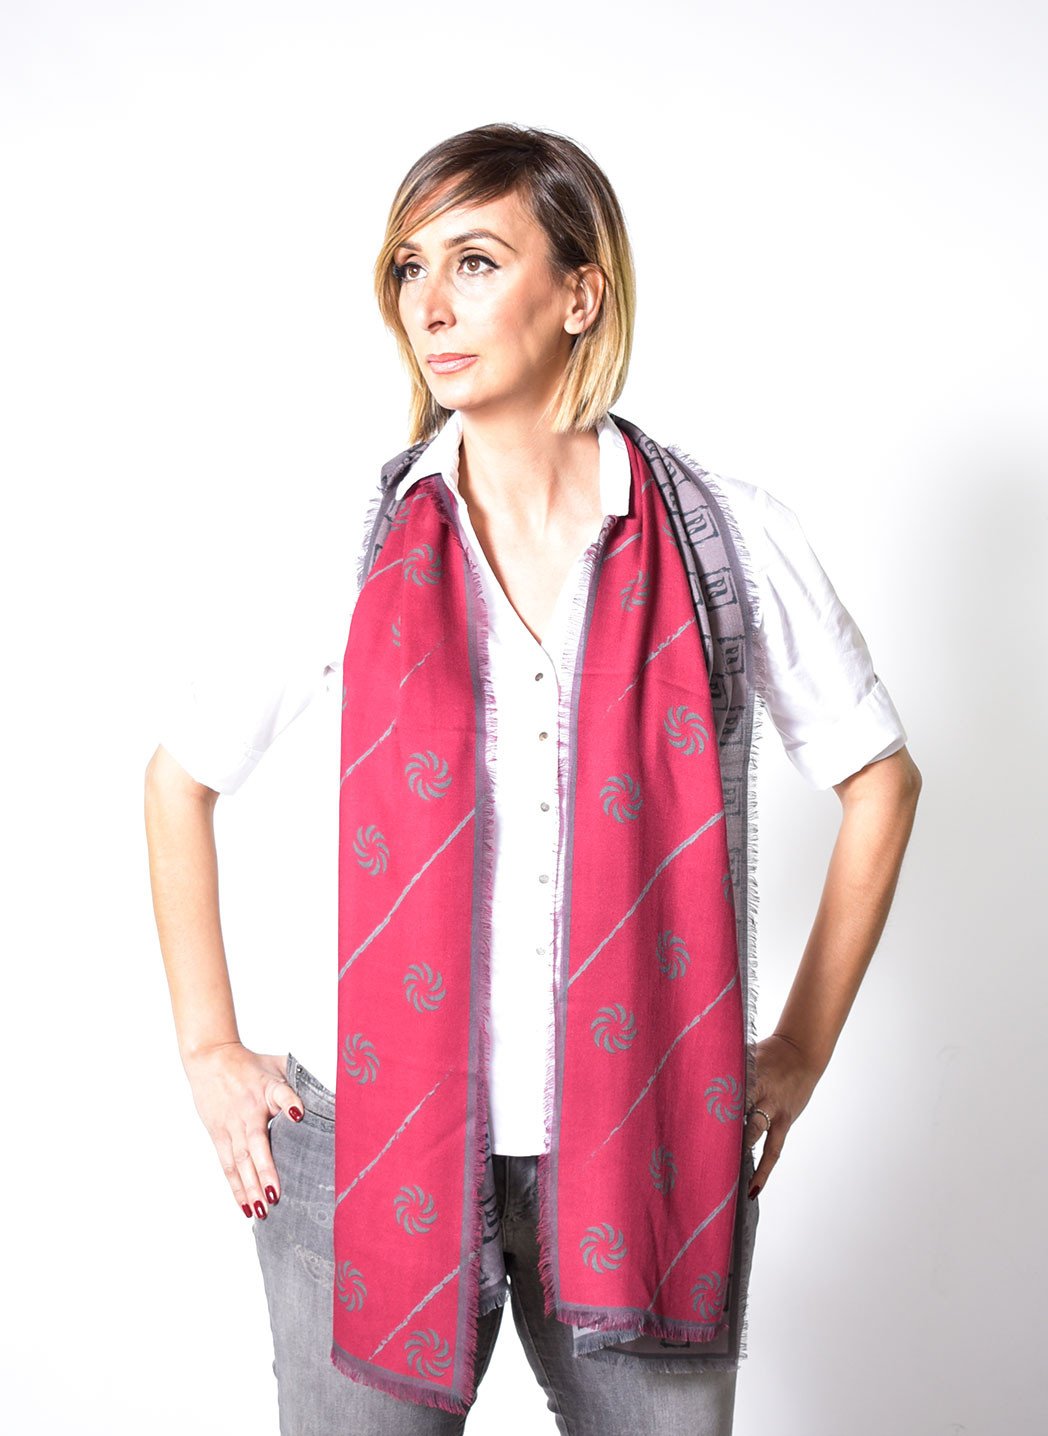 Anet's Collection Eternity Burgundy Unisex Scarf